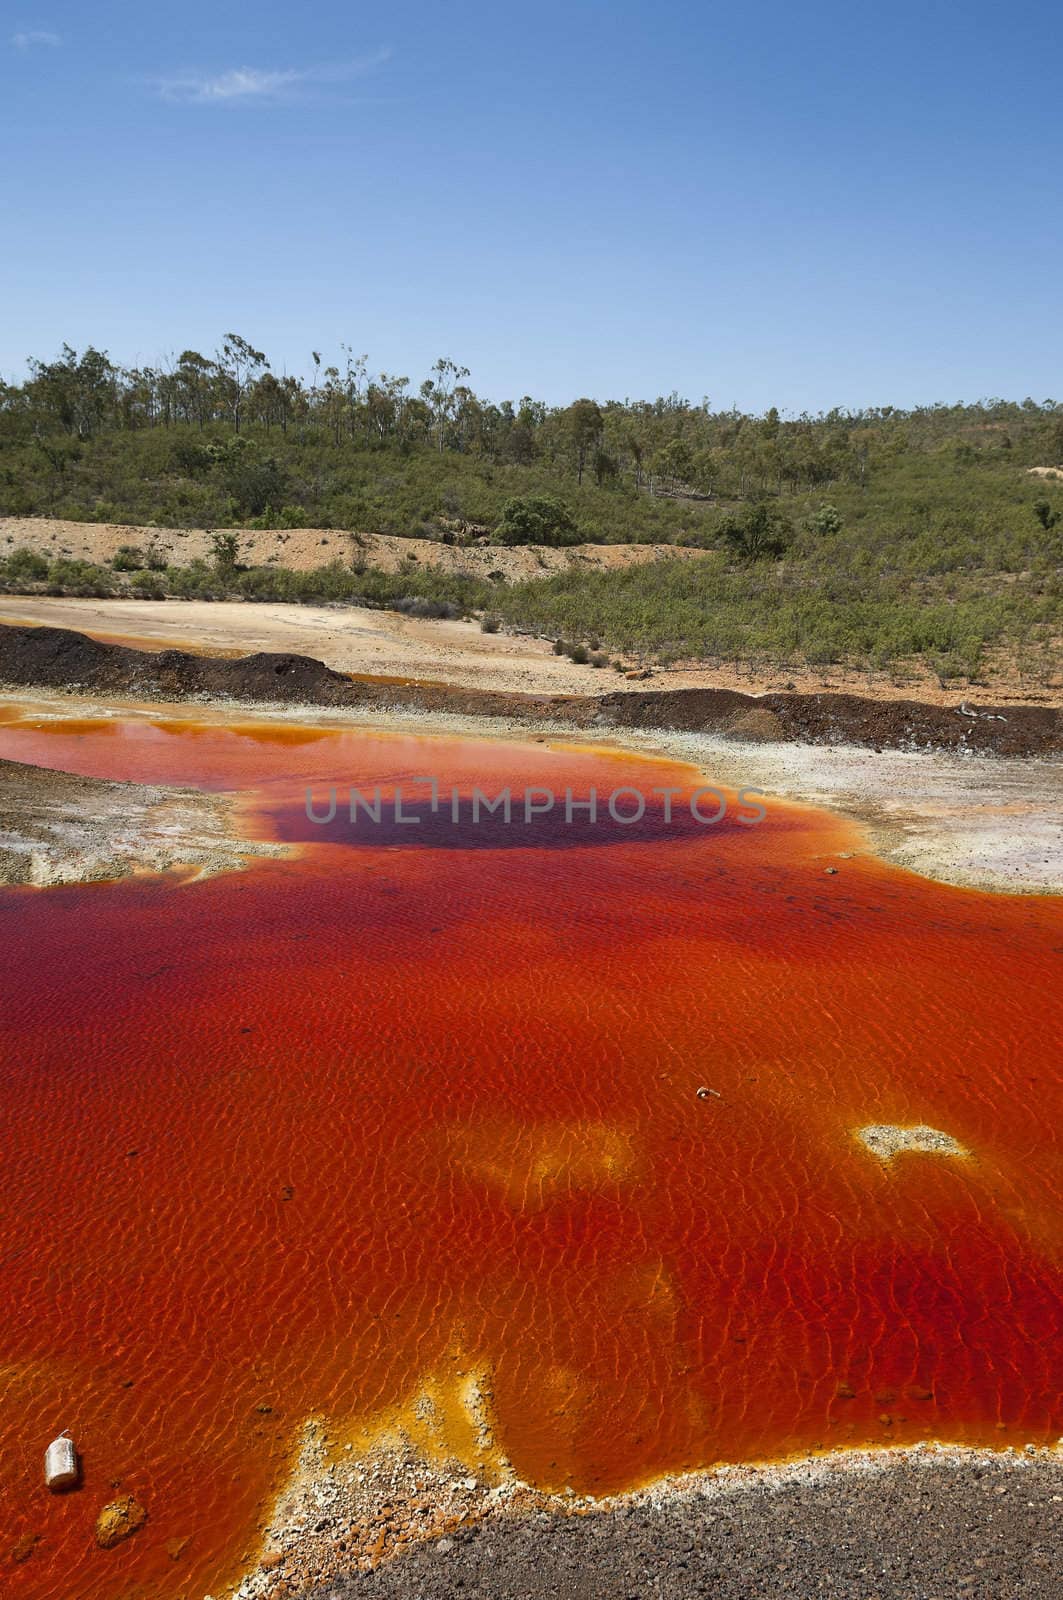 Detail of the red acid water pond in São Domingos Mine, a deserted open-pit mine in Mertola, Alentejo, Portugal. This site is one of the volcanogenic massive sulfide ore deposits in the Iberian Pyrite Belt, which extends from the southern Portugal into Spain